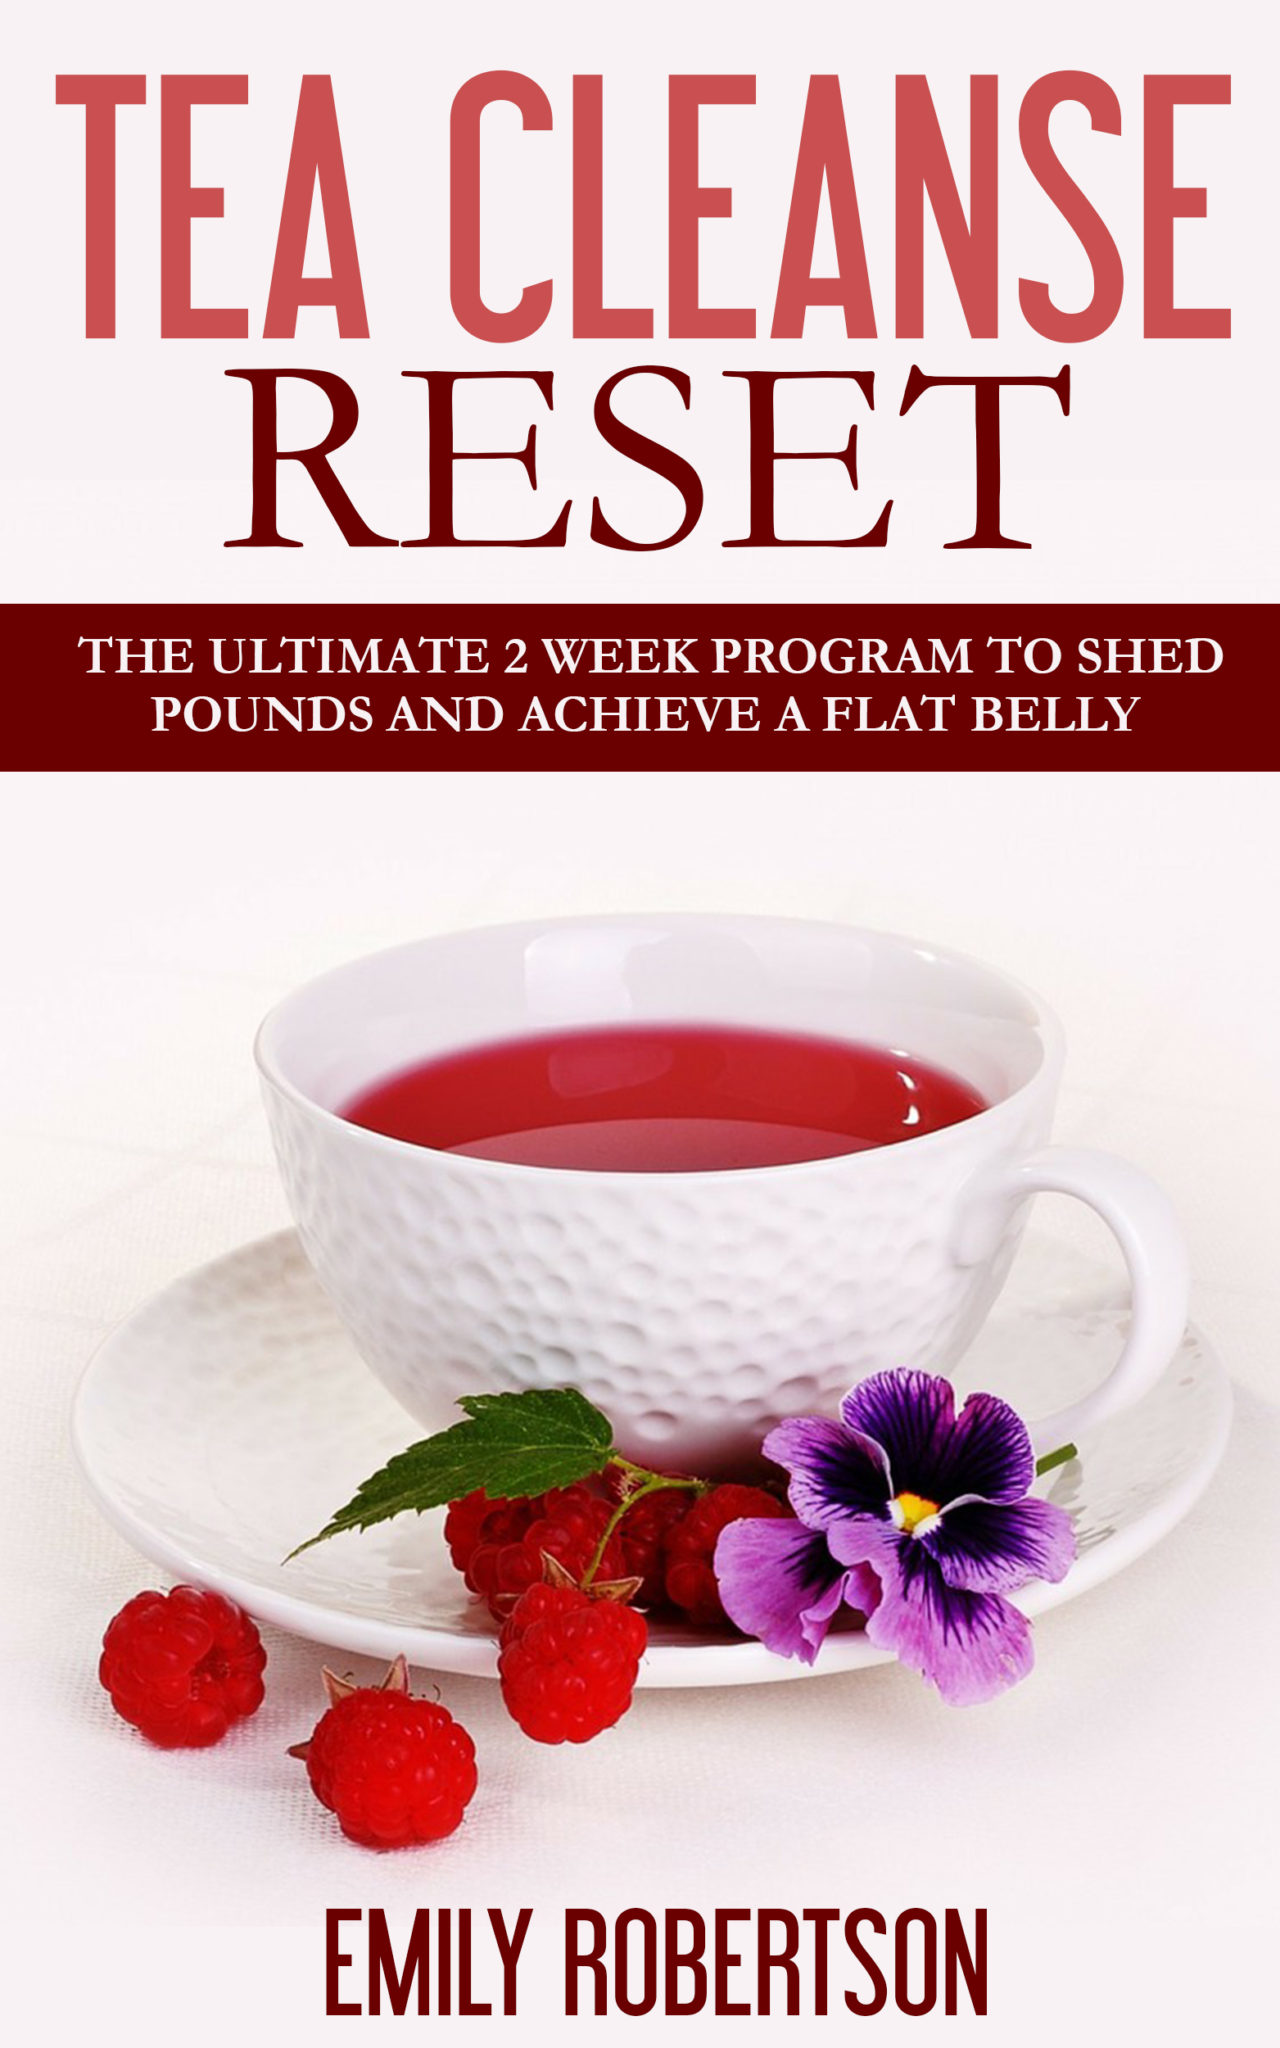 FREE: Tea Cleanse Reset: The Ultimate 2 Week Program To Shed Pounds And Achieve A Flat Belly by Emily Robertson